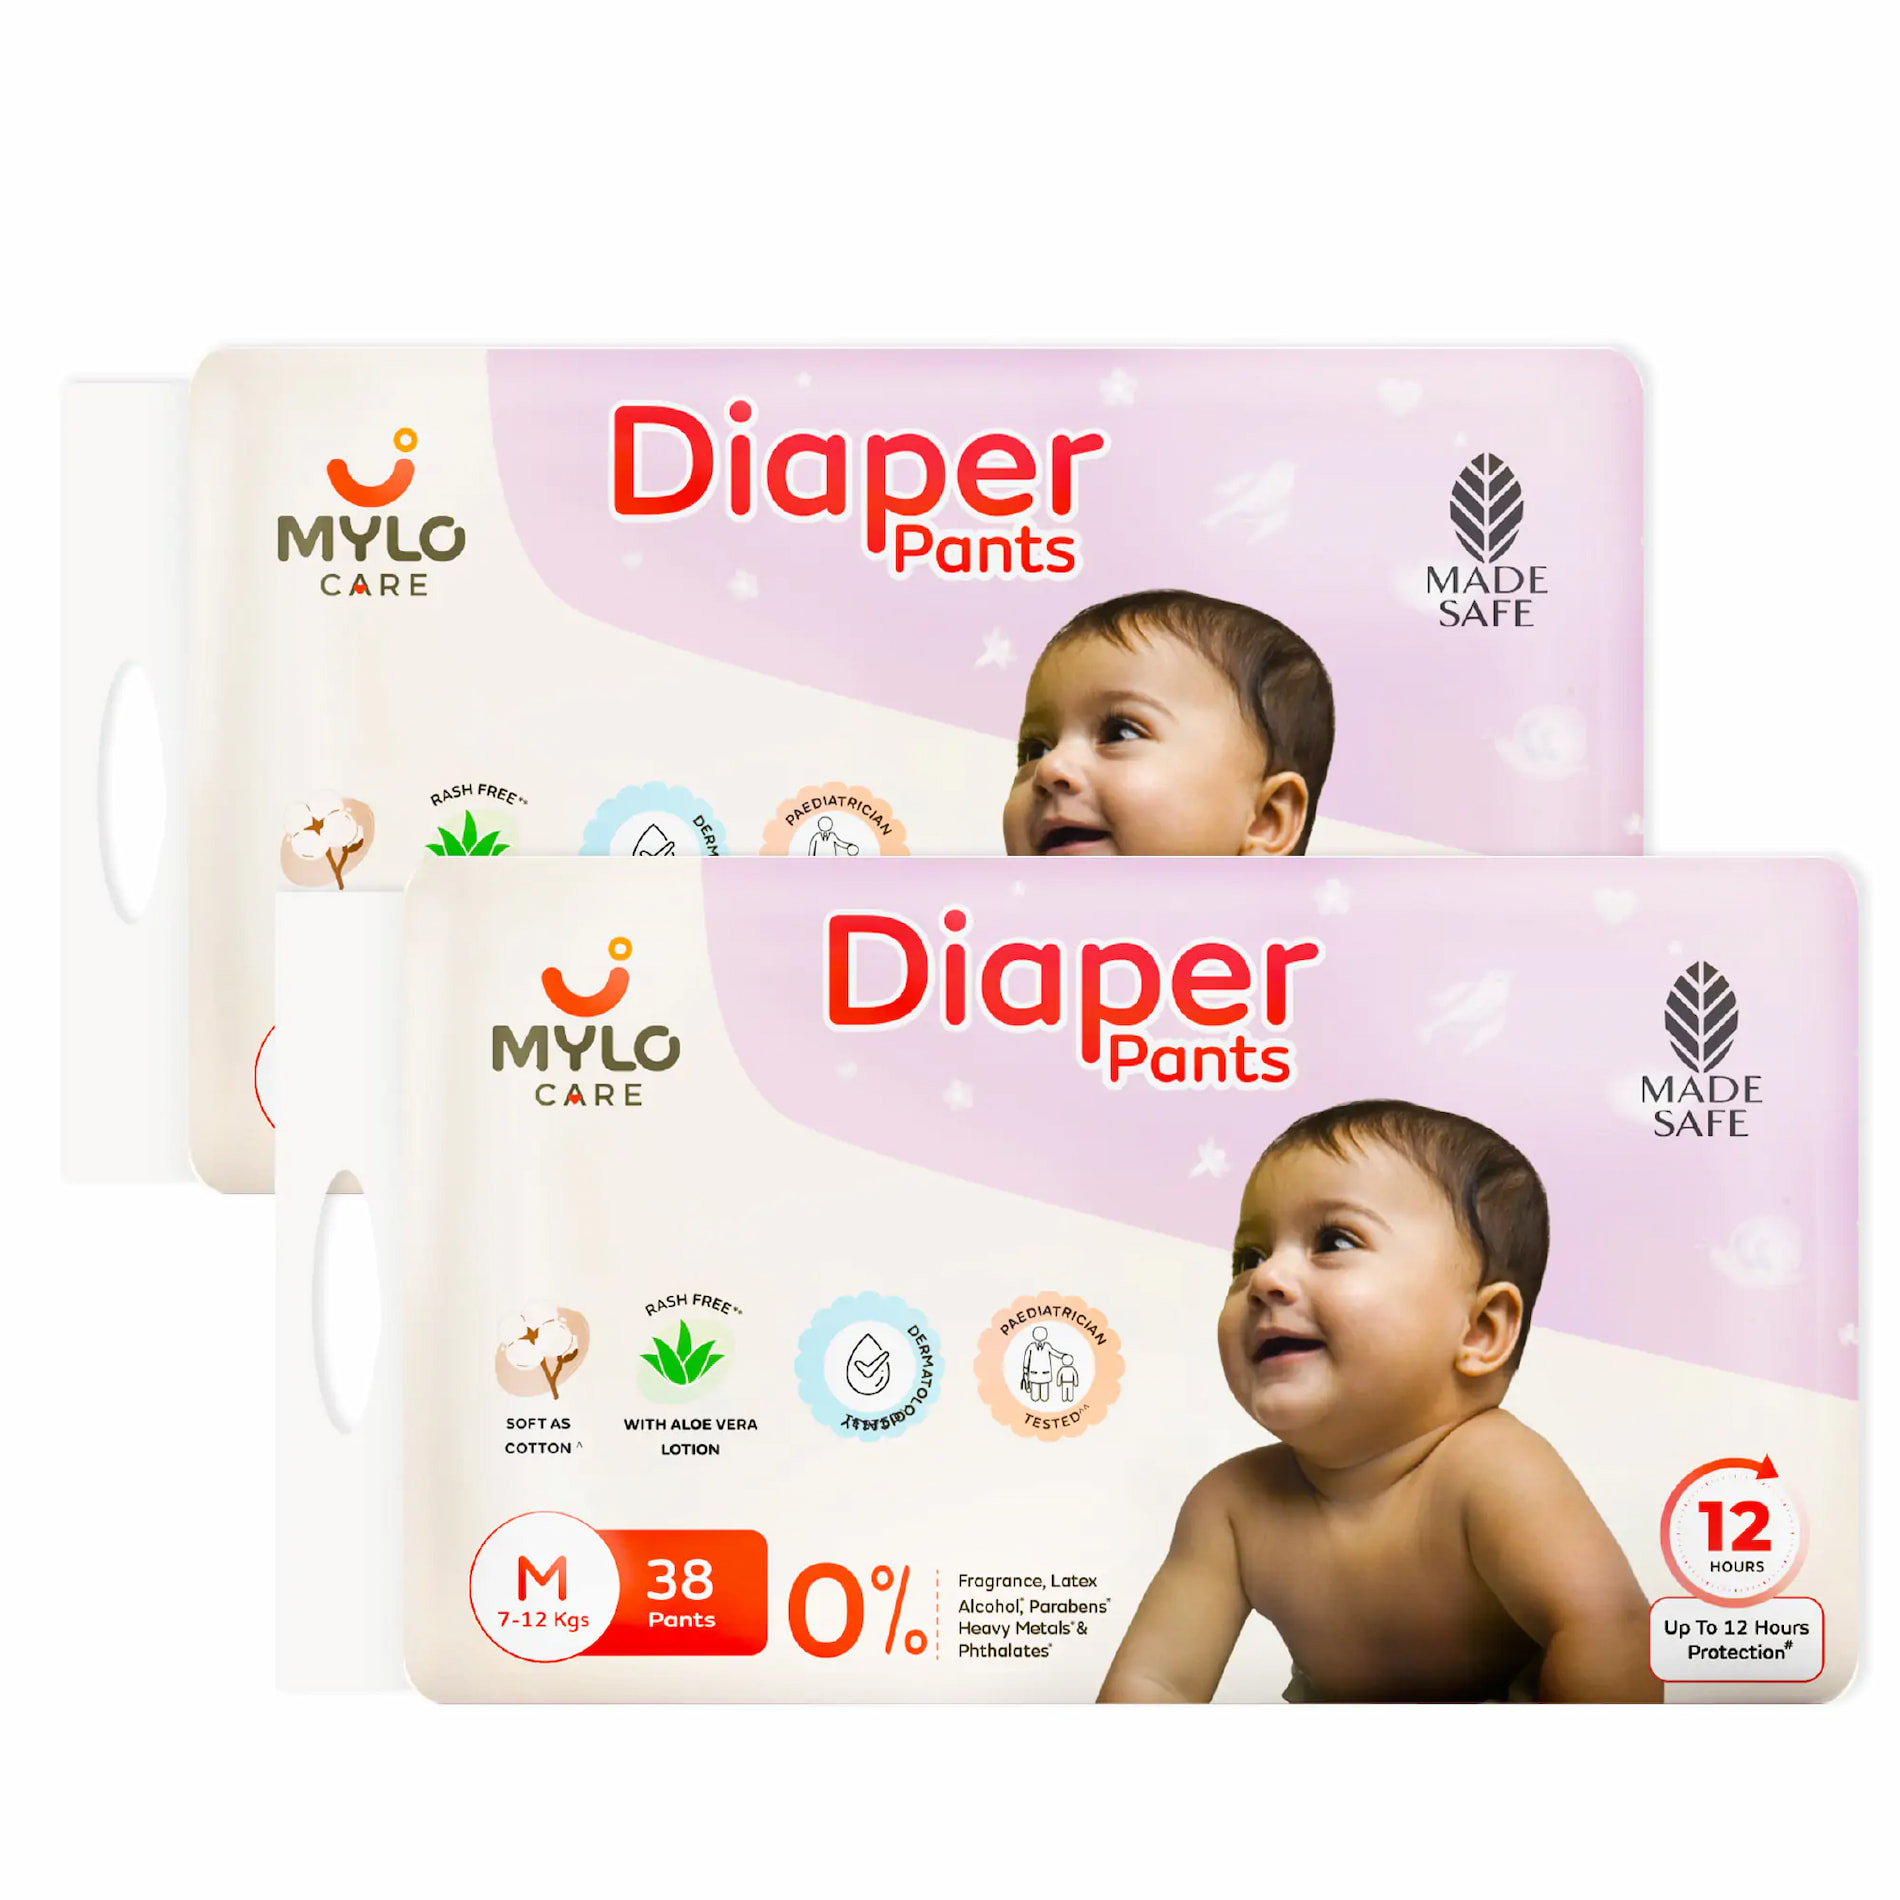 Mylo Care Baby Diaper Pants Medium (M) Size, 7-12 kgs with ADL Technology - 76 Count - 12 Hours Protection 